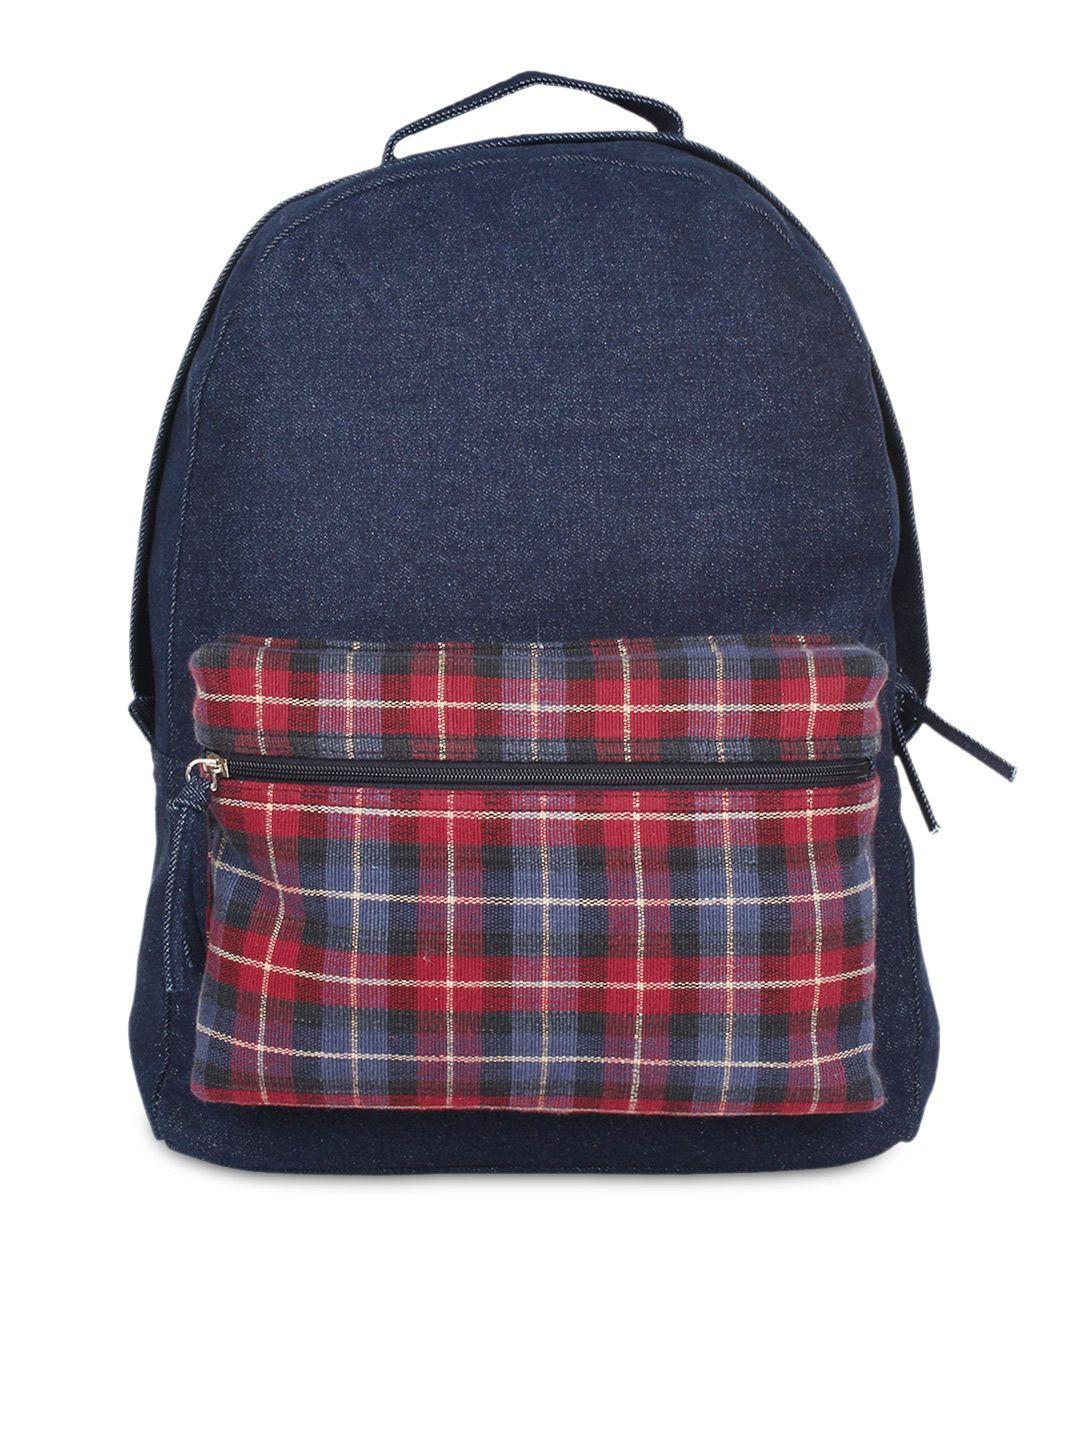 anekaant women blue denim checked backpack